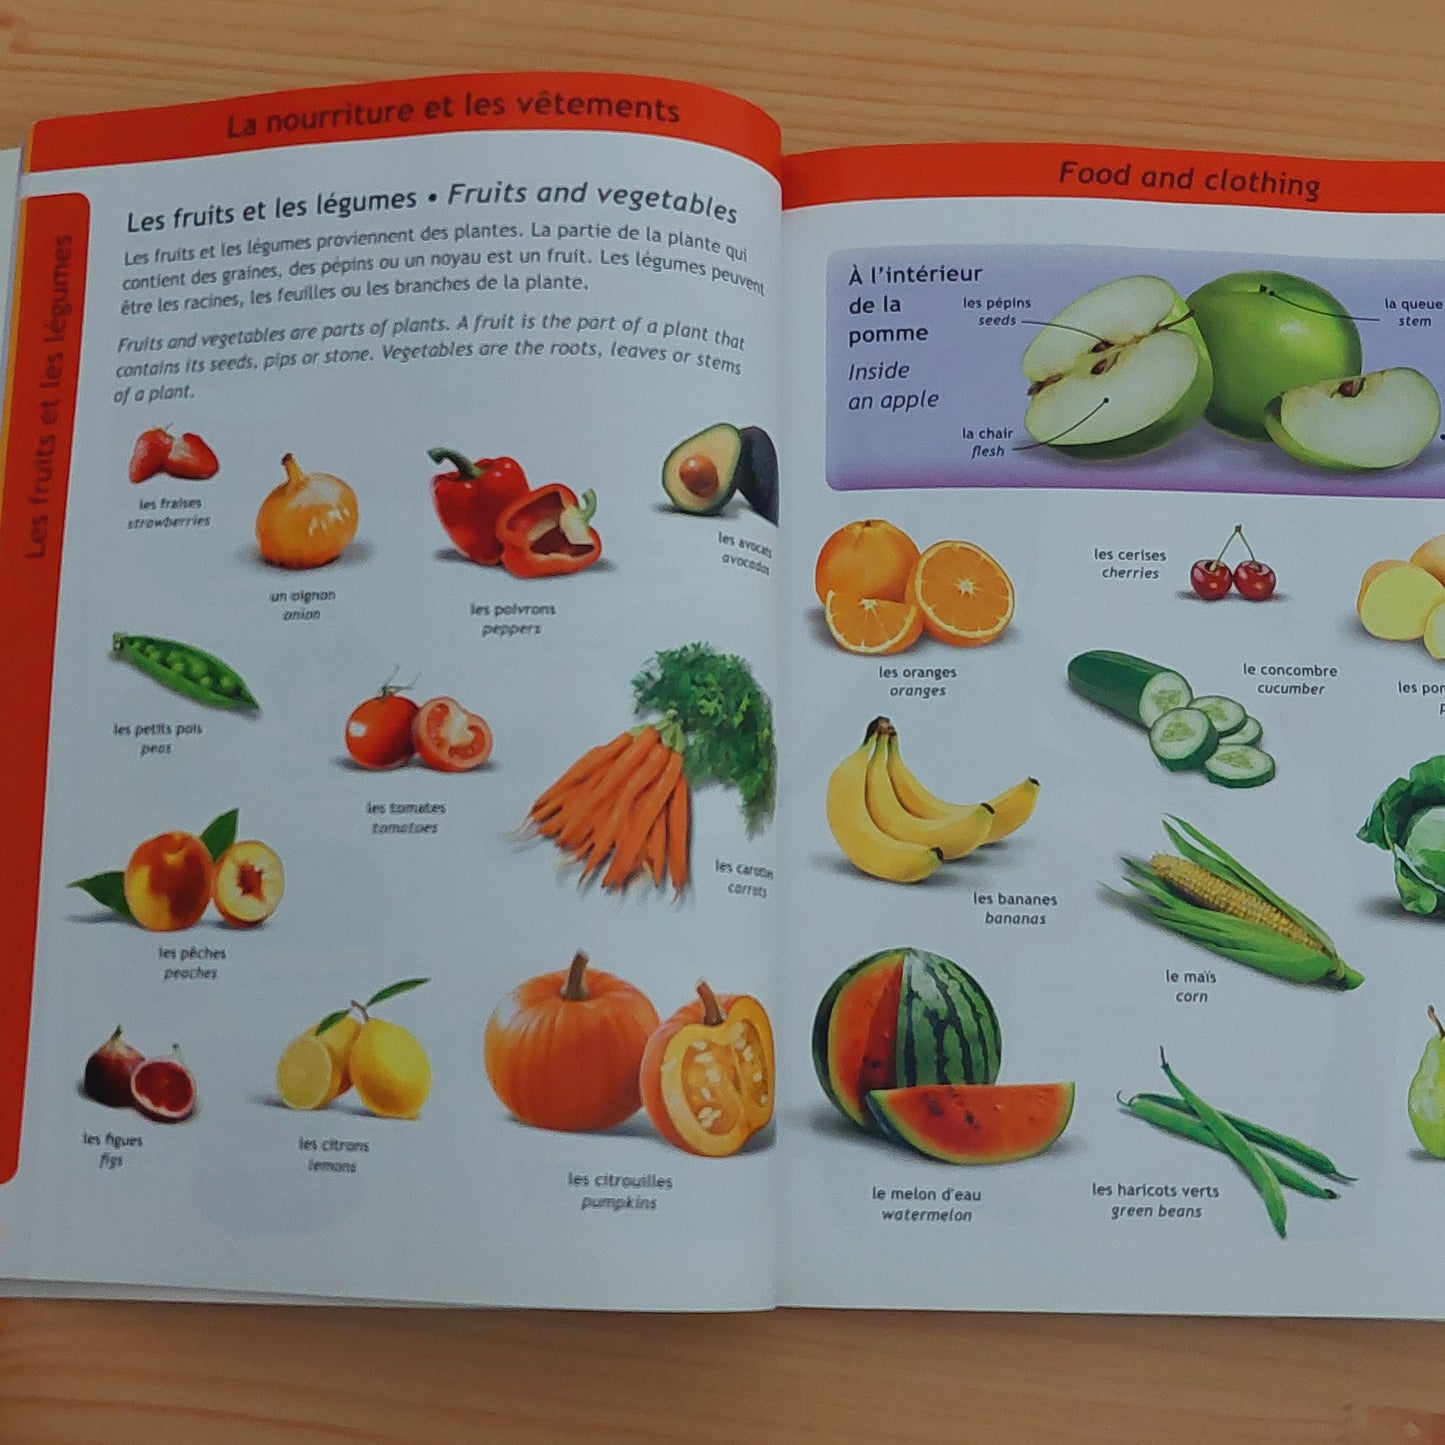 Children's French-English Visual Dictionary